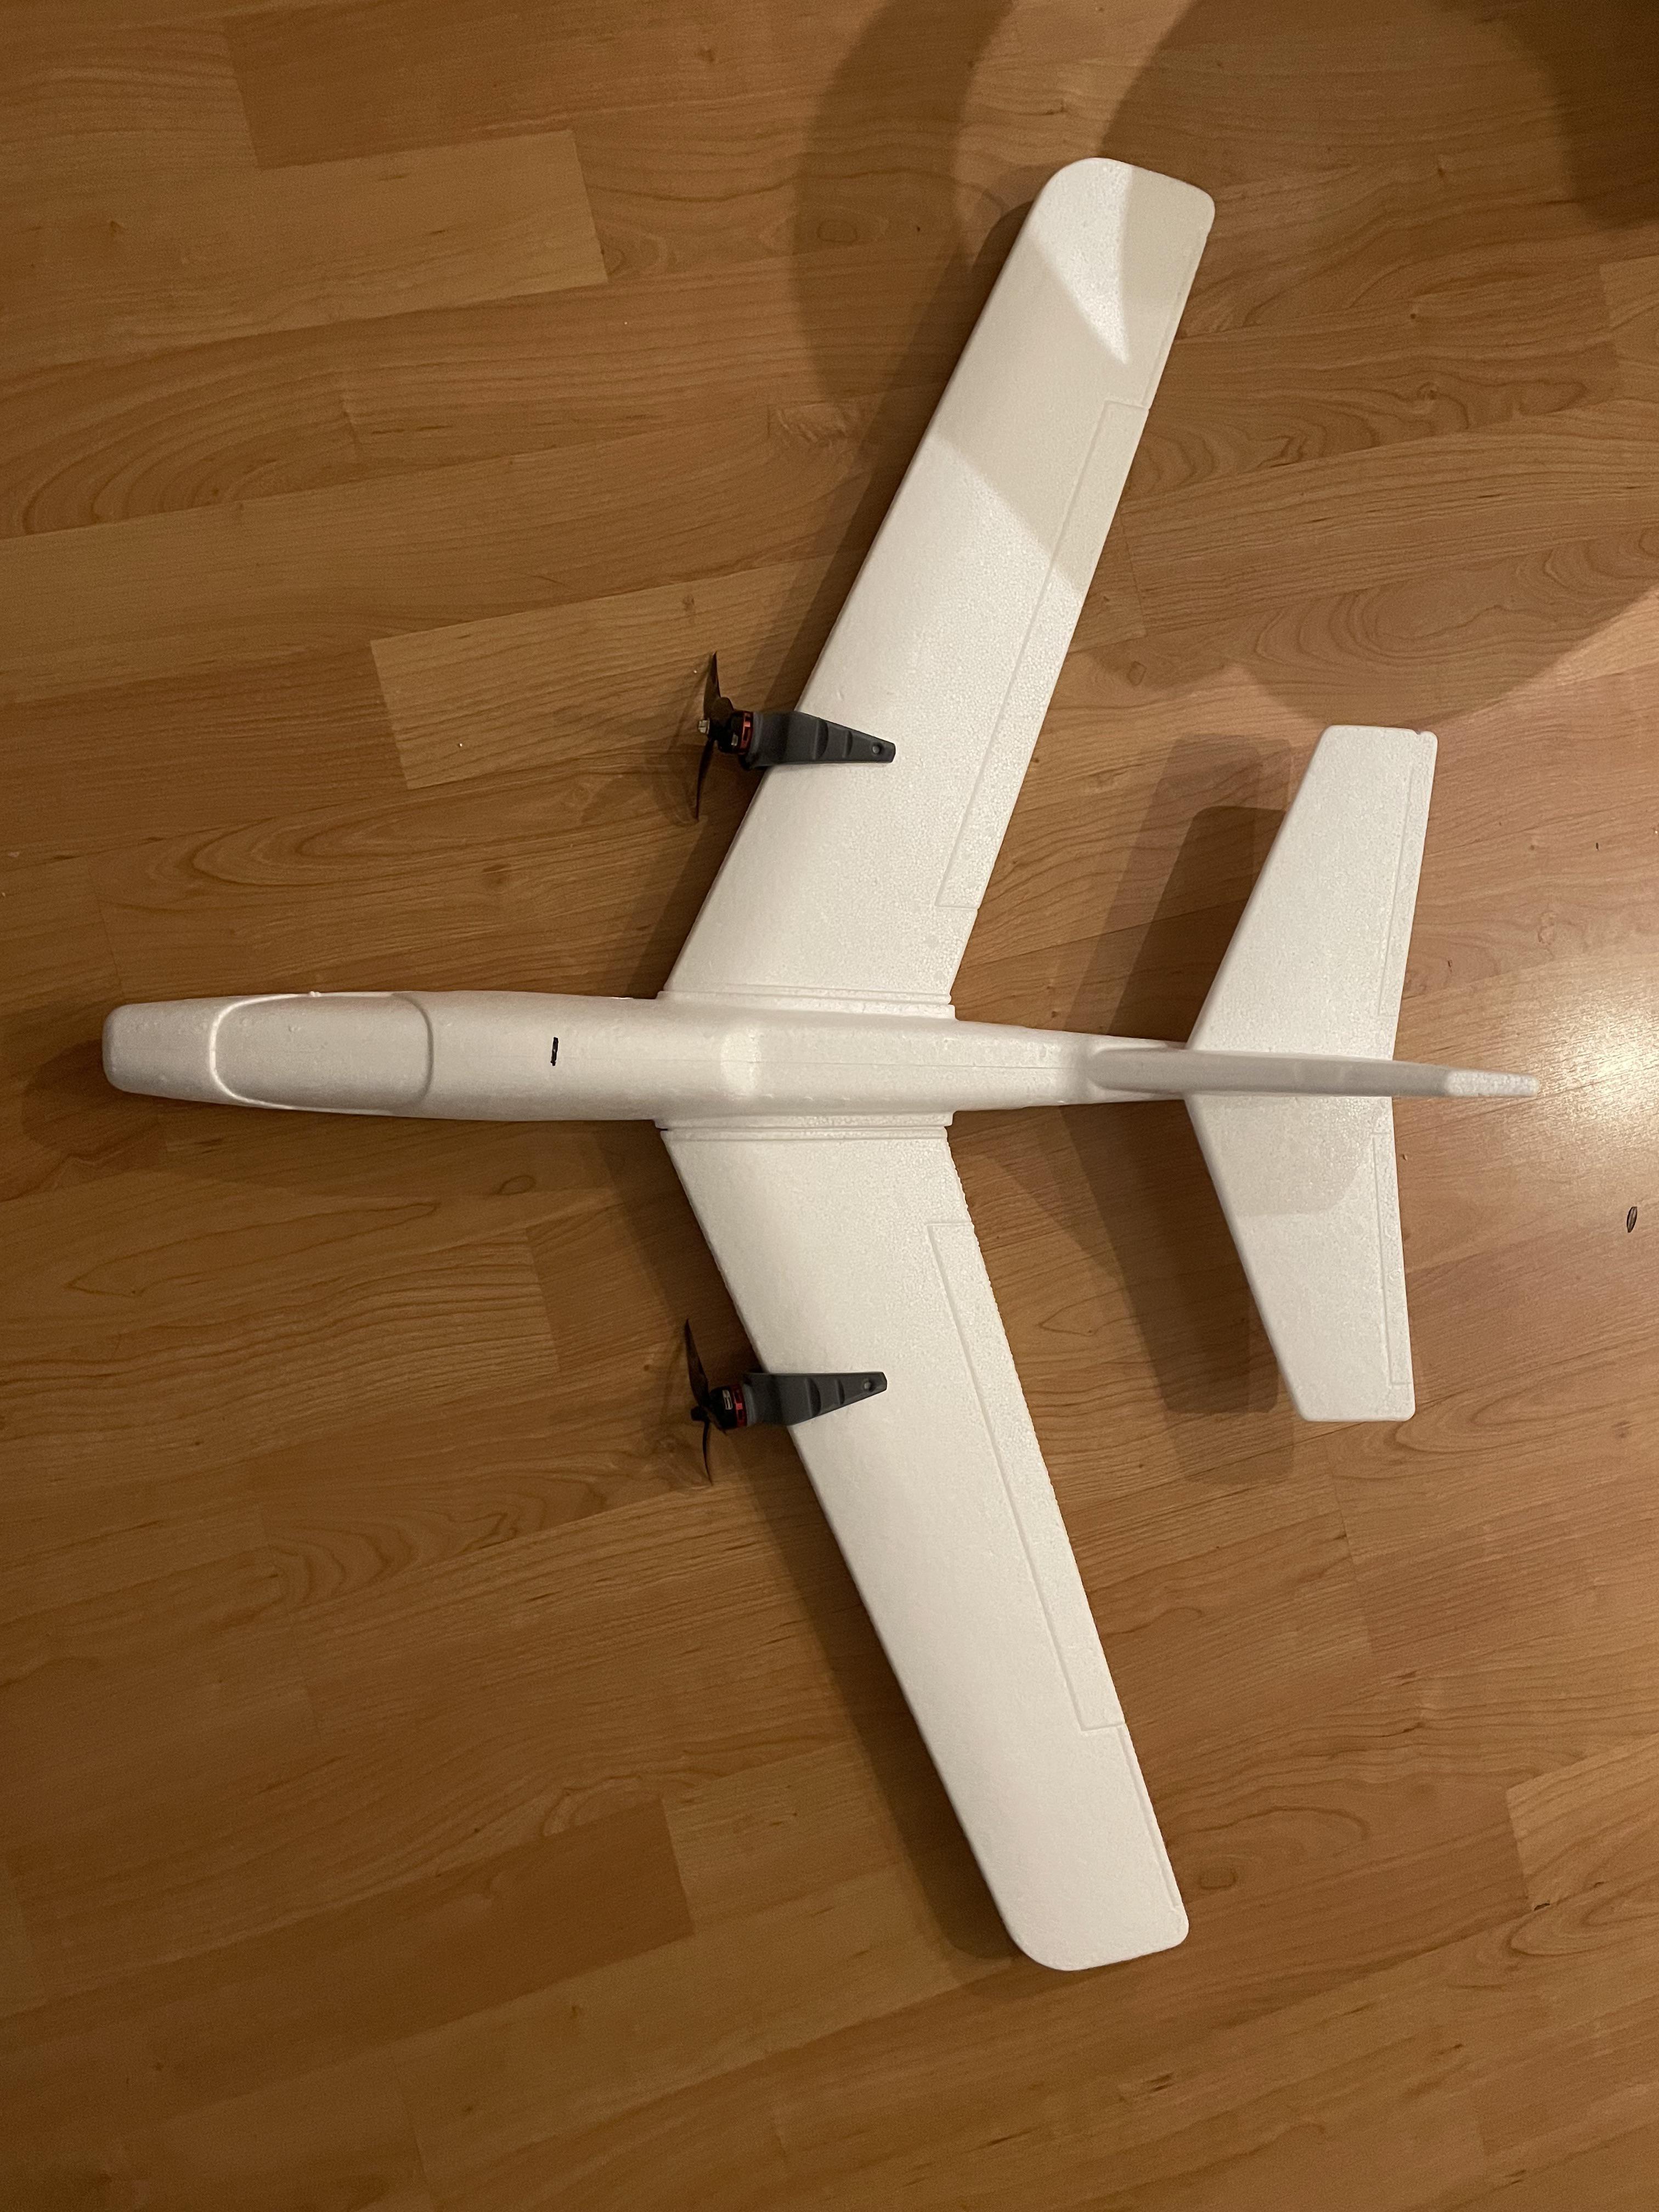 Rc Glider Motor: Choosing the Right Motor for Your RC Glider